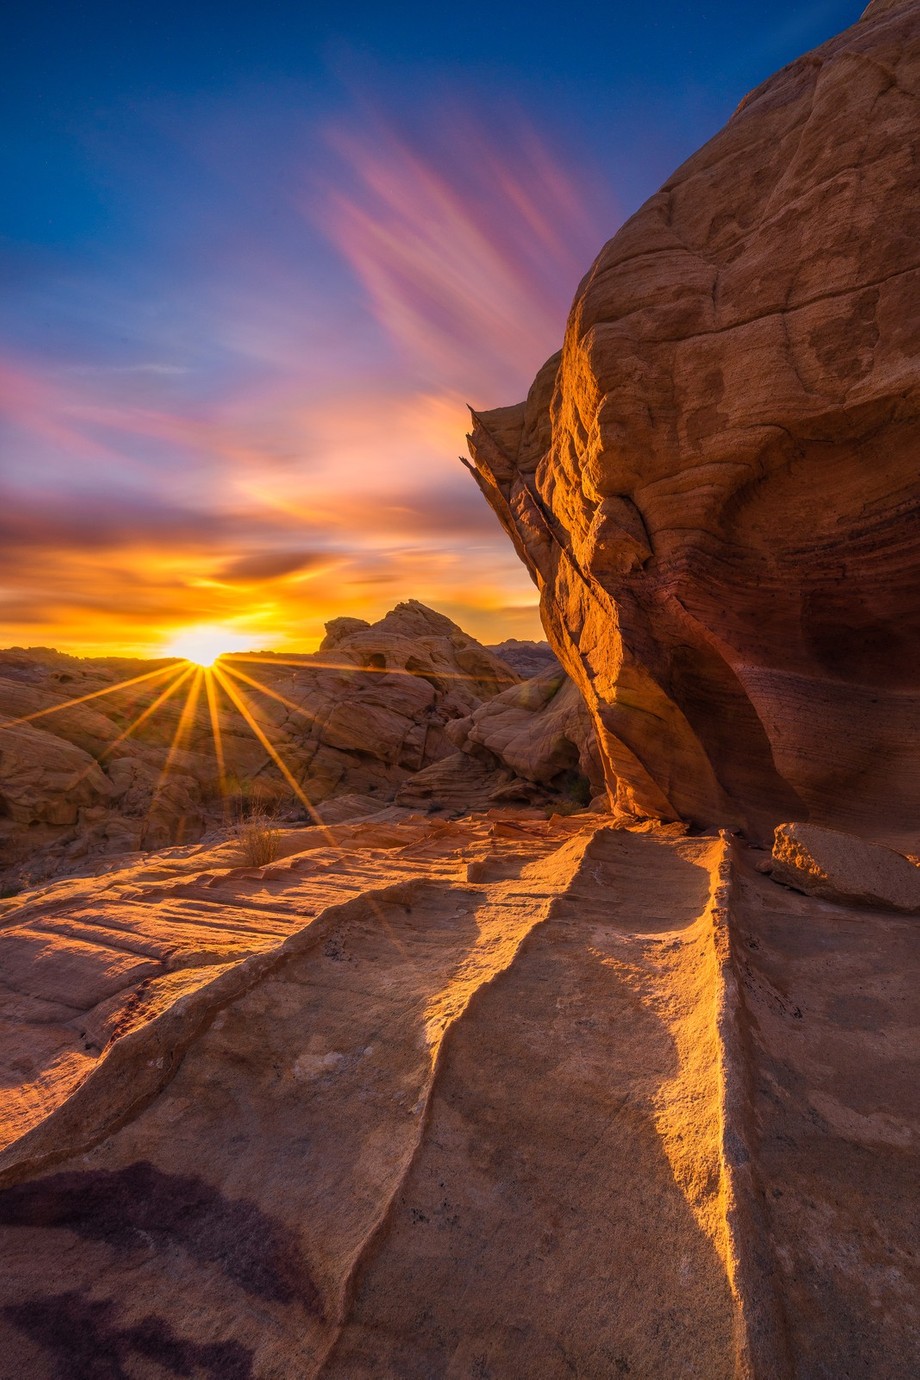 Sunset at Valley of Fire by jessicacathrinesantos - Bright Colors In Nature Photo Contest